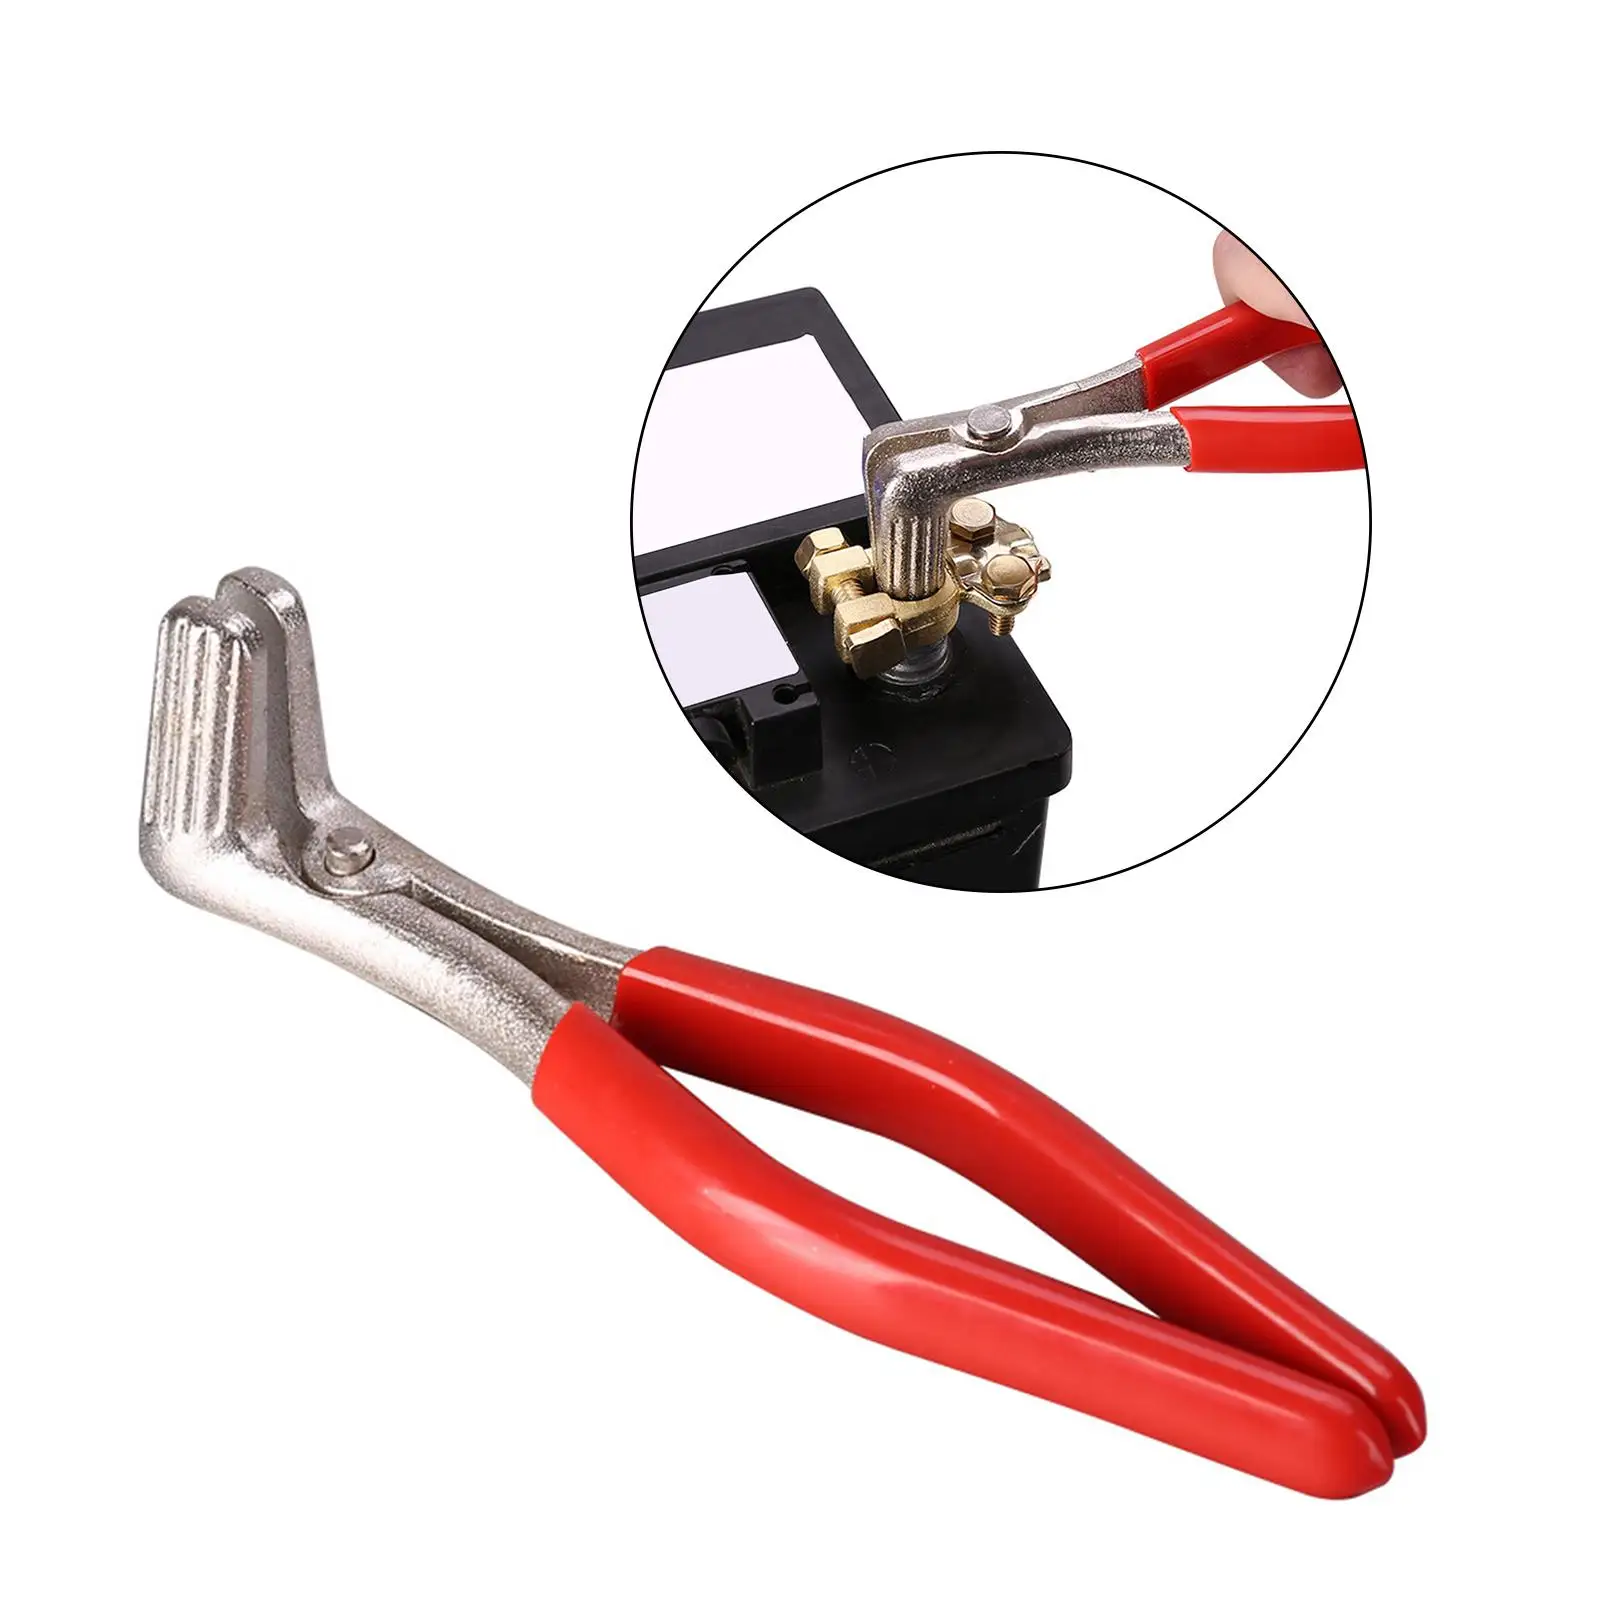 Auto Battery Pliers Angled Plier Head Multipurpose Practical Hand Tools Repair